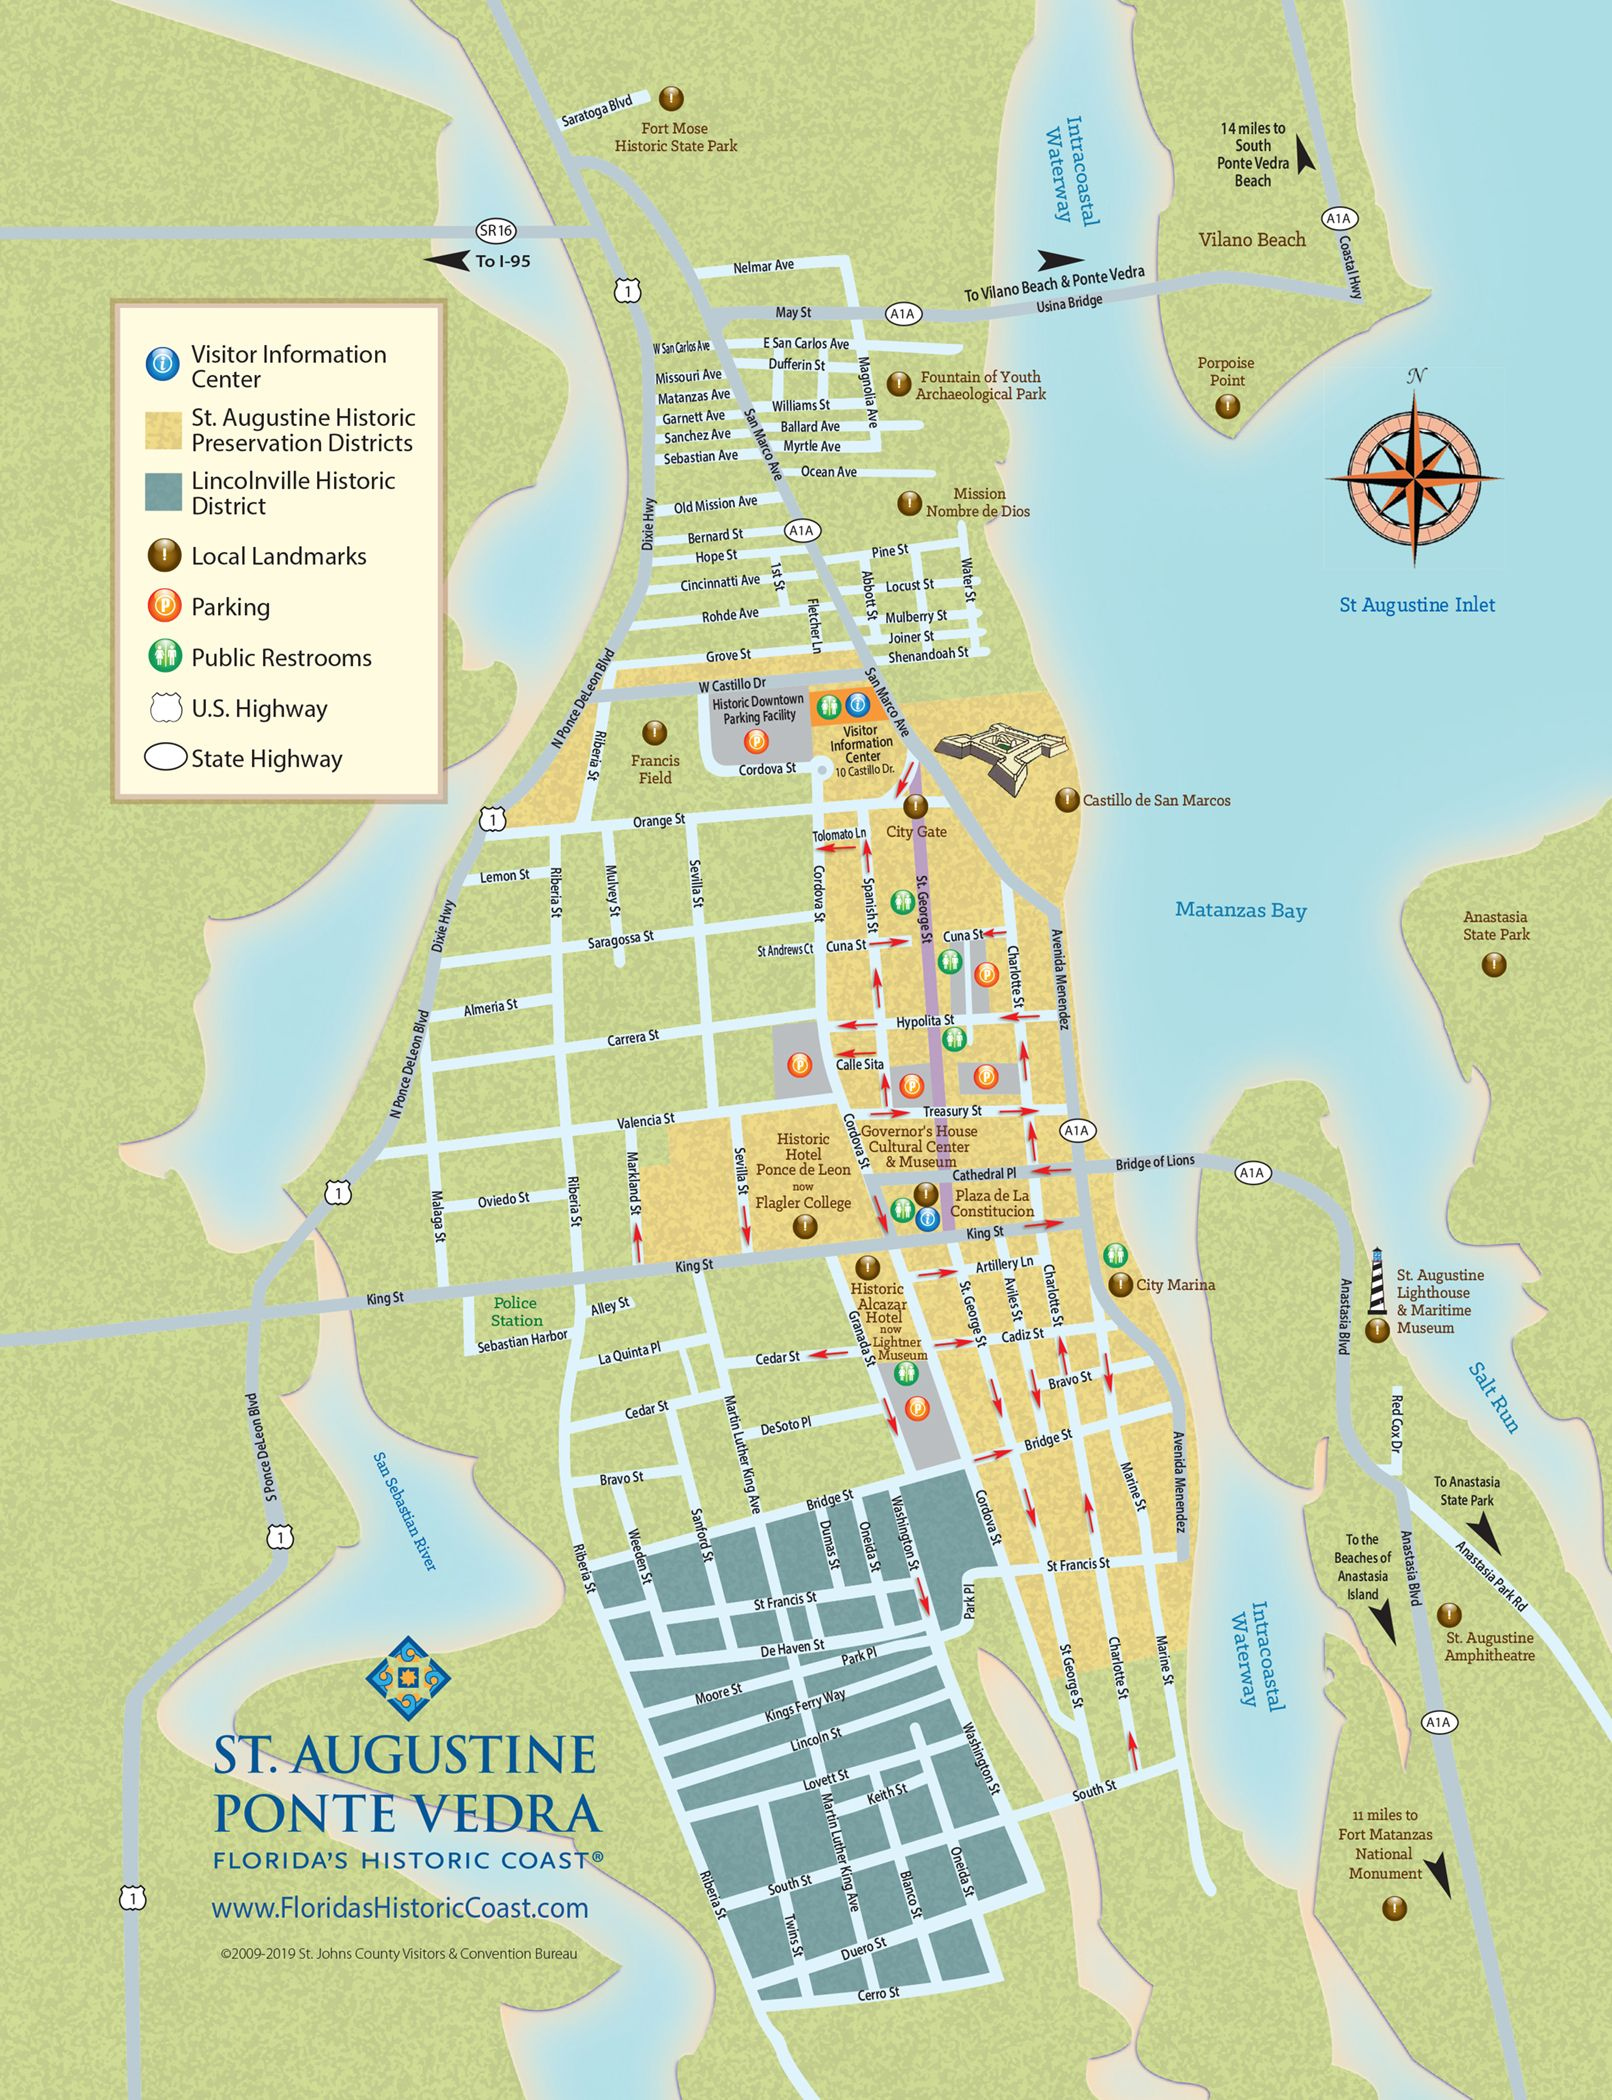 Downtown St Augustine Florida Vacation Map Of Florida Florida Travel